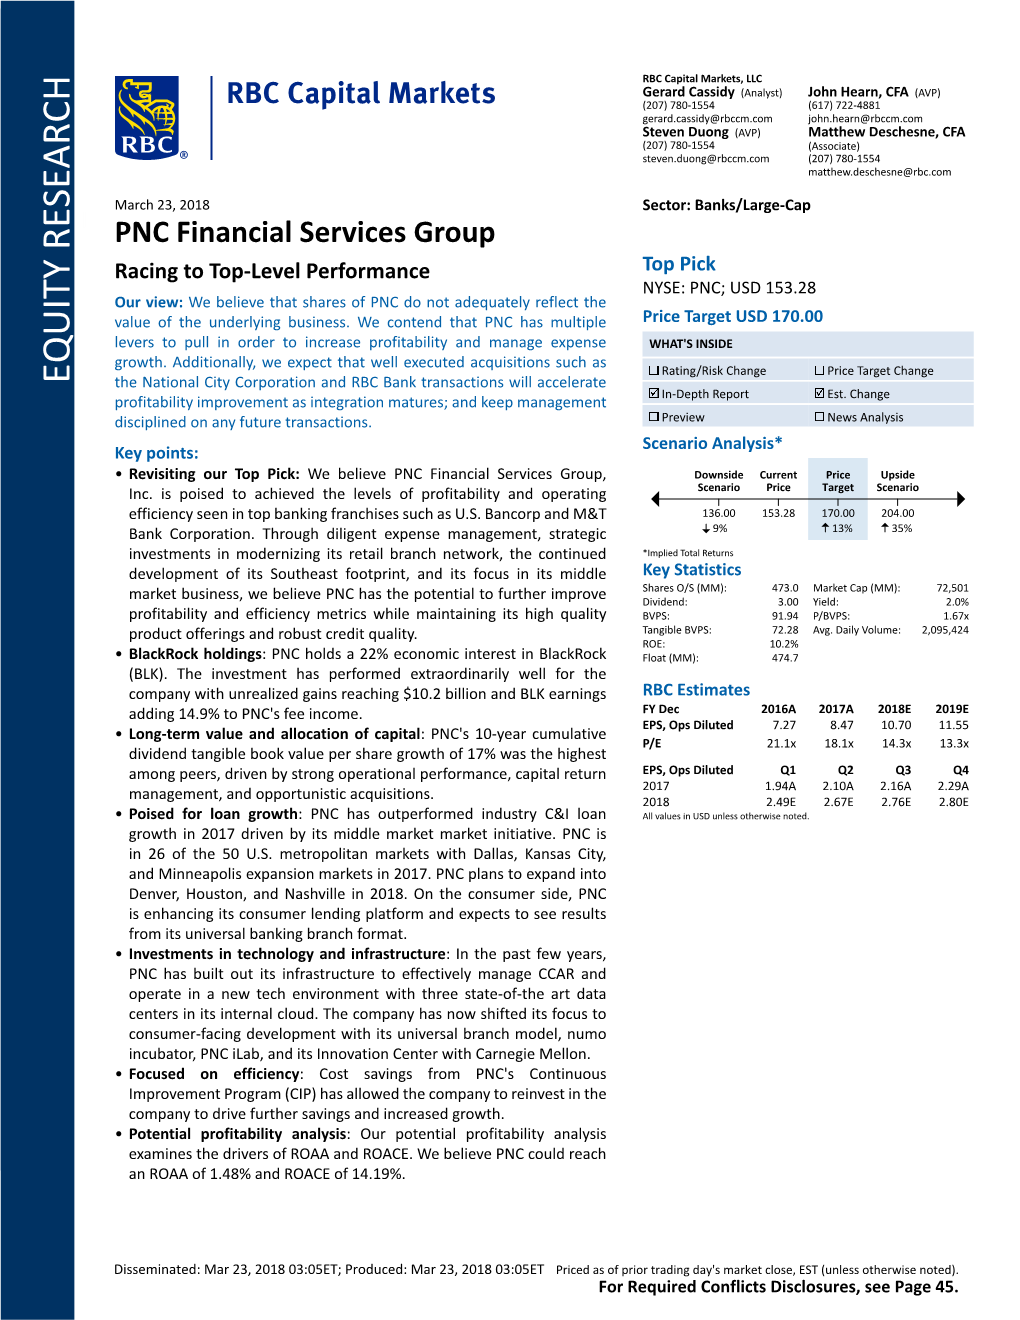 PNC Financial Services Group Equity Research